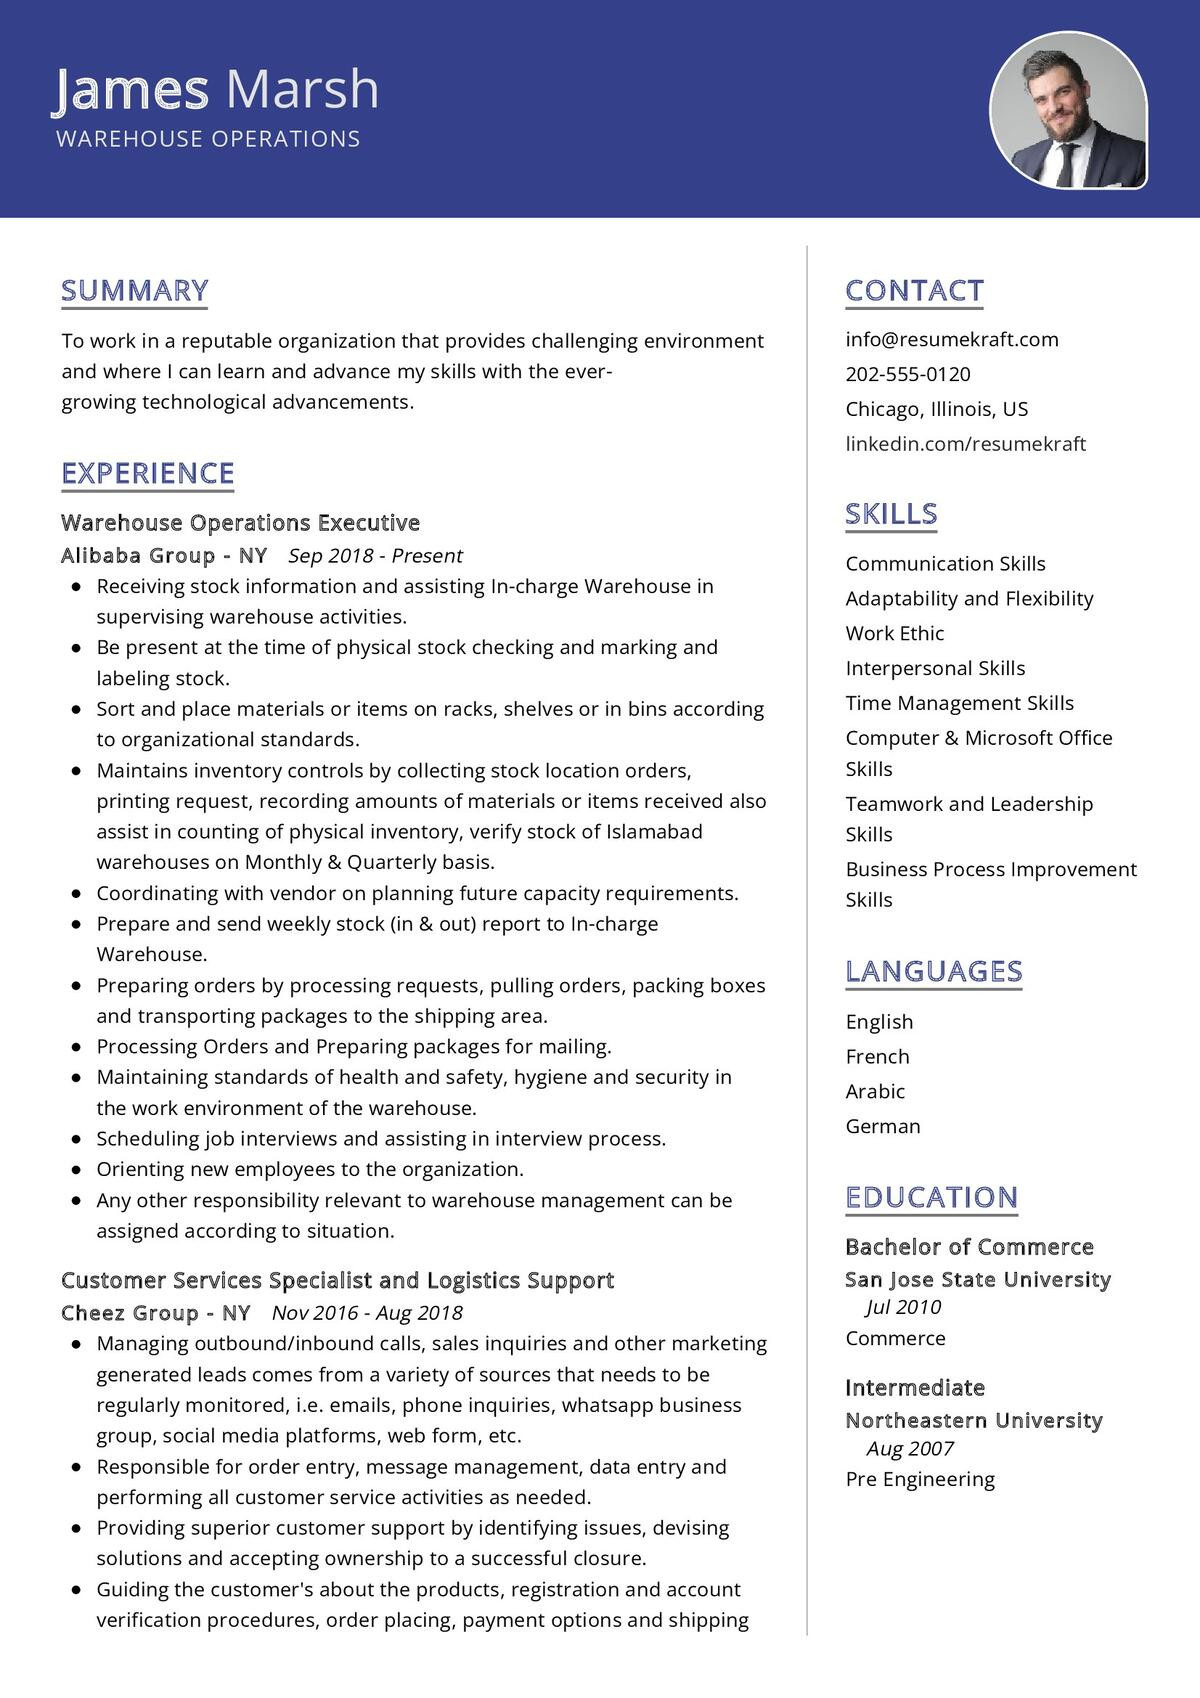 Sample Resume for Warehouse Operations Manager Warehouse Operations Cv Sample 2022 Writing Tips – Resumekraft